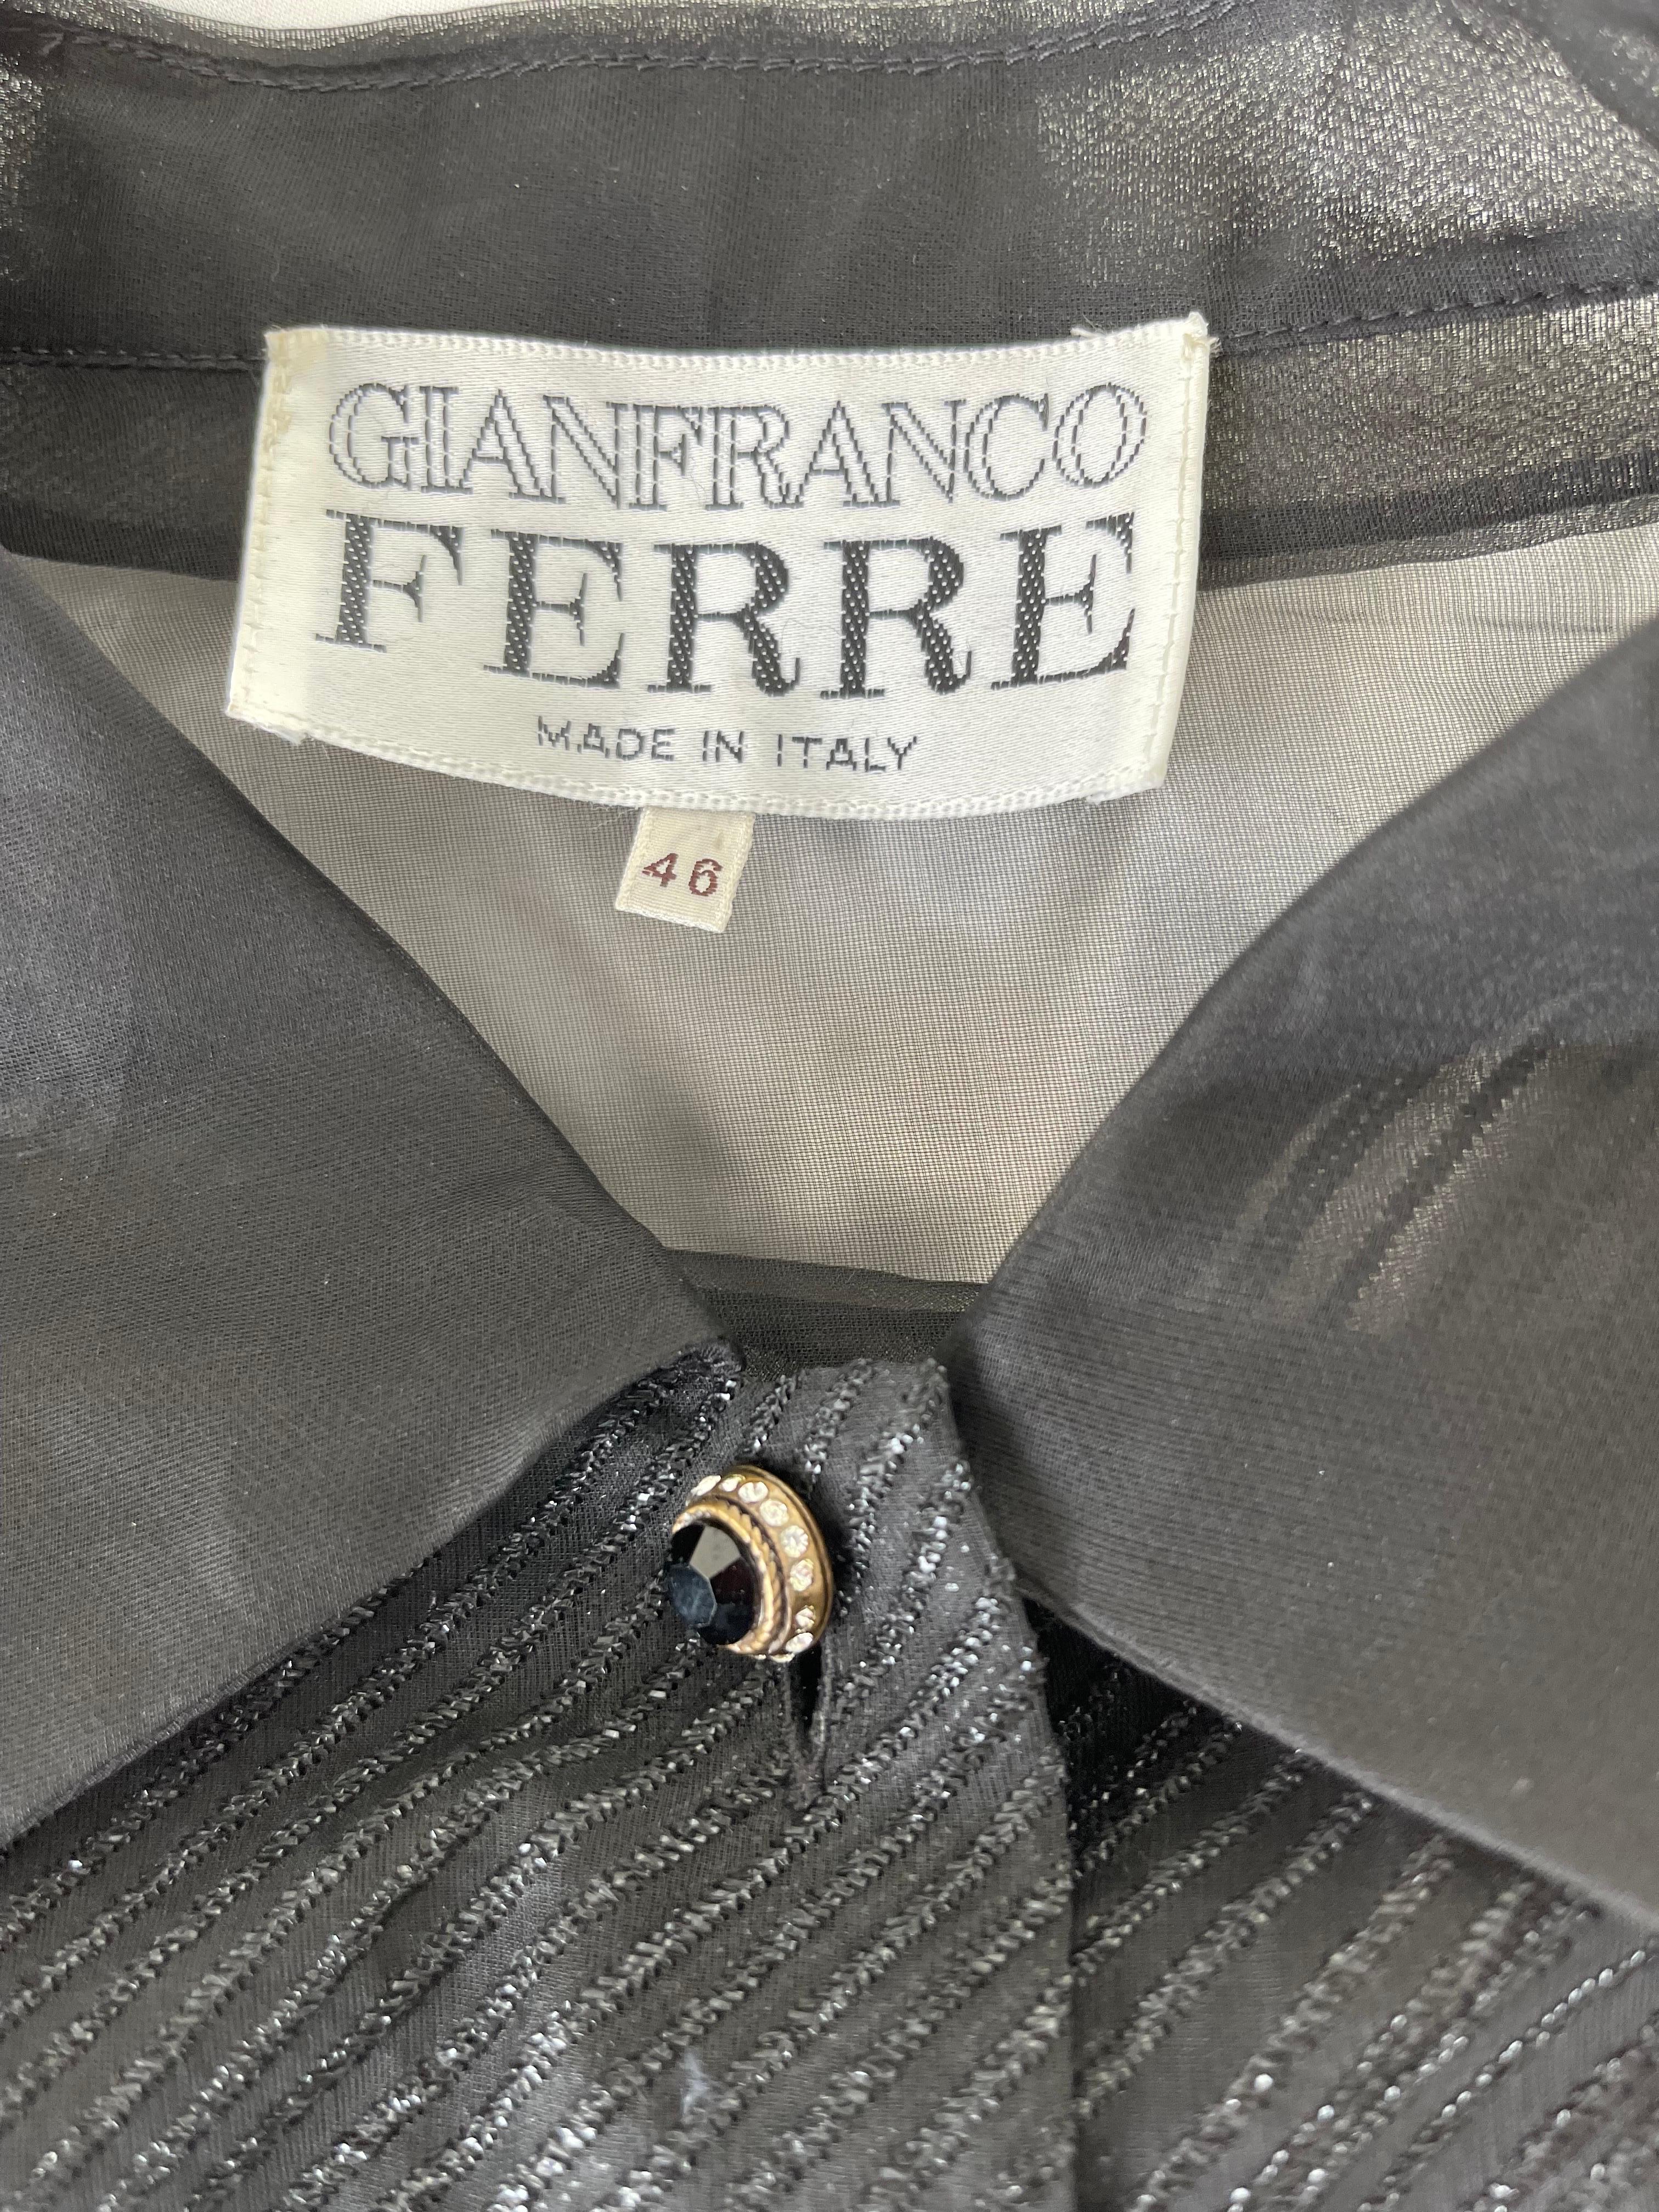 Beautiful 90s vintage GIANFRANCO FERRE black silk chiffon sheer blouse ! Rhinestone encrusted buttons down the front. Great belted or alone.
In great unworn condition 
Made in Italy
Marked Size 46 / Extra Large
Measurements:
46 inch bust
48 inch